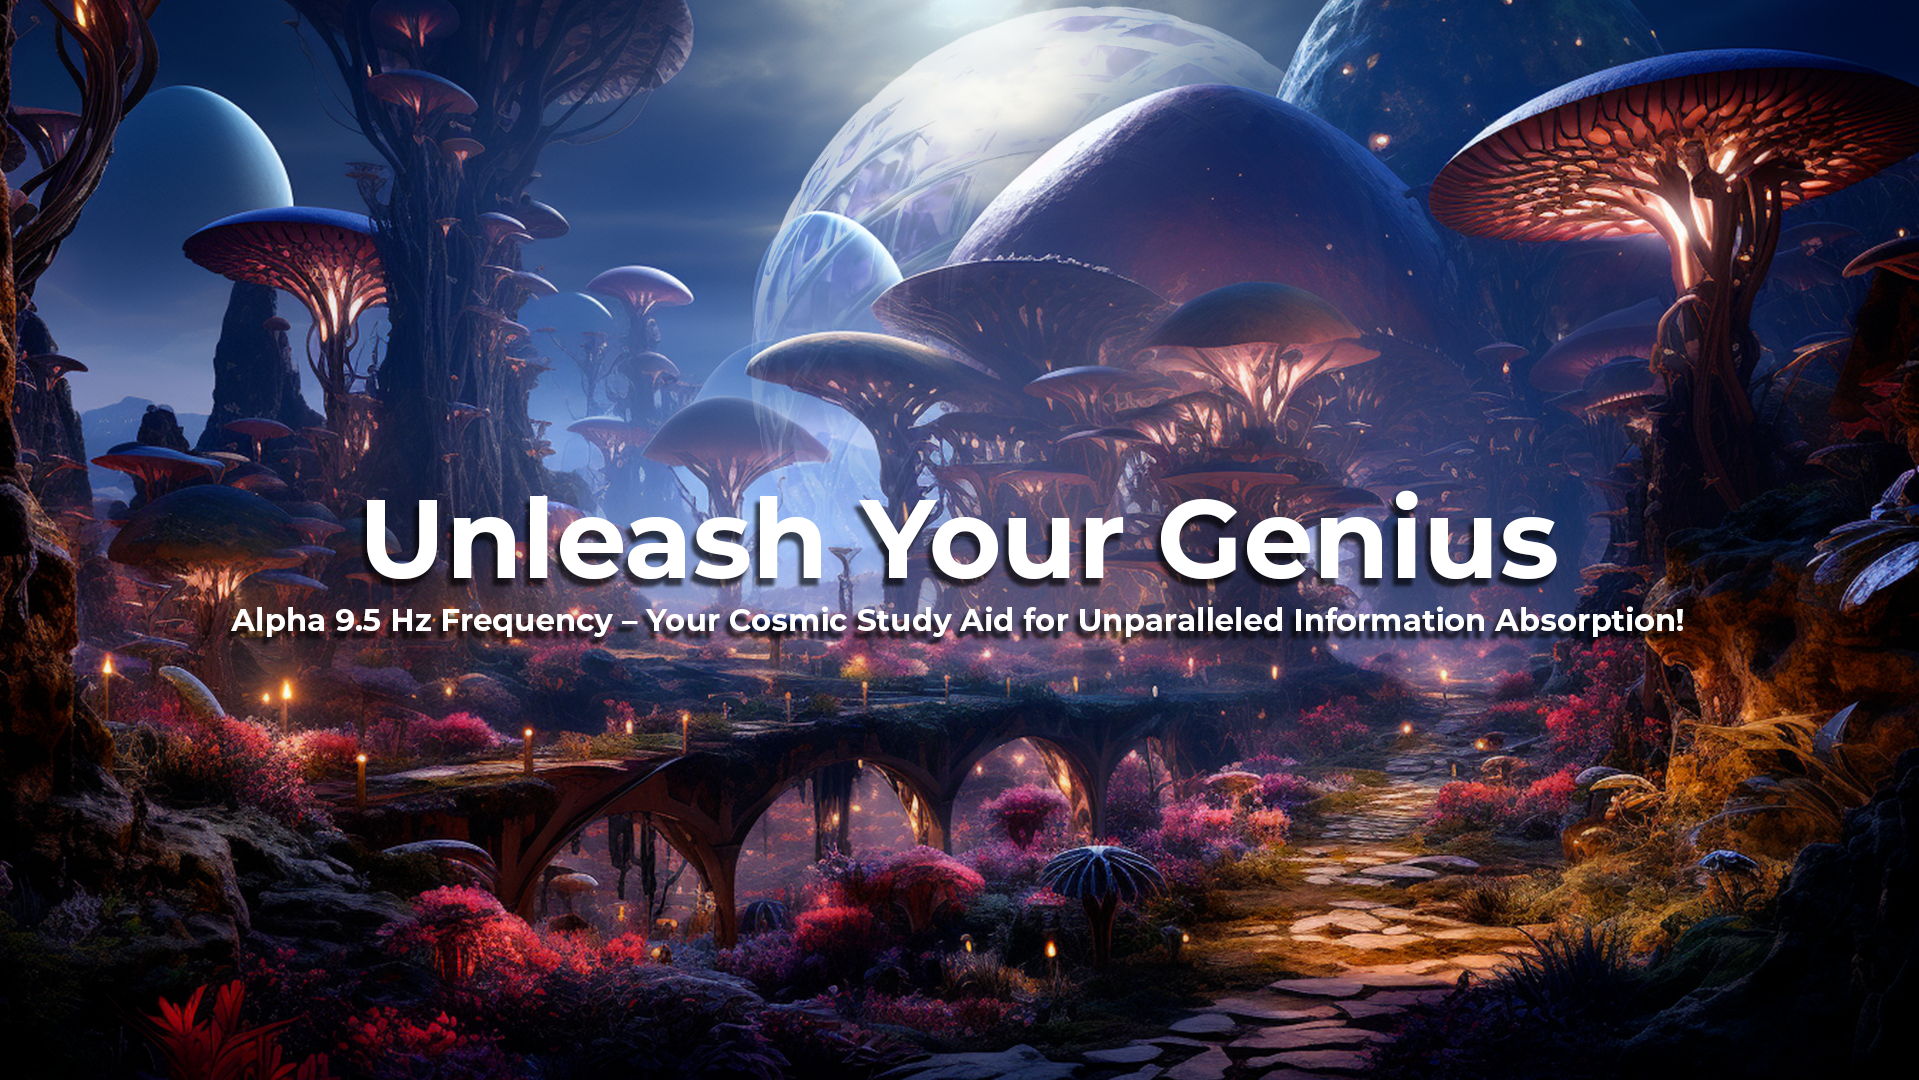 Unleash Your Genius: Alpha 9.5 Hz Frequency – Your Cosmic Study Aid for Unparalleled Information Absorption